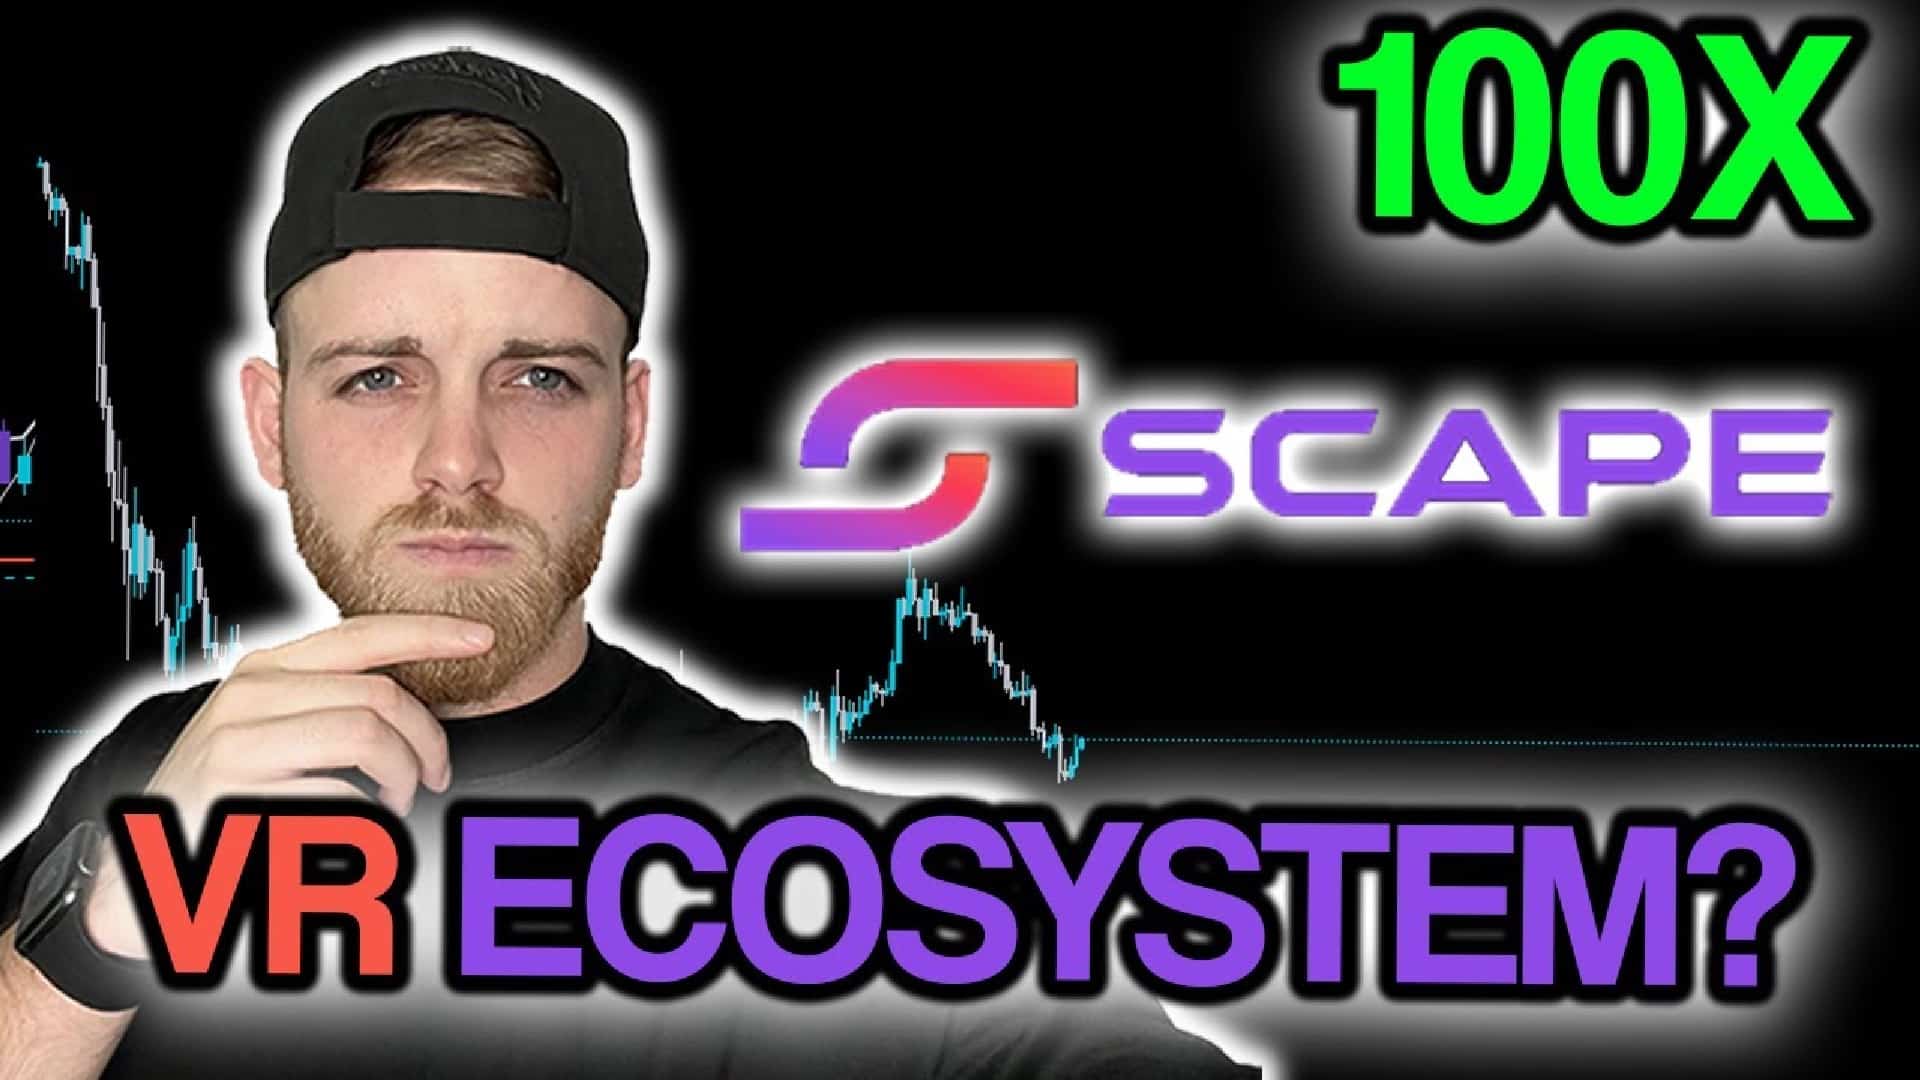 5th Scape Presale Surges Toward $6 Million – Could This Be the Next 100x Return on Investment?